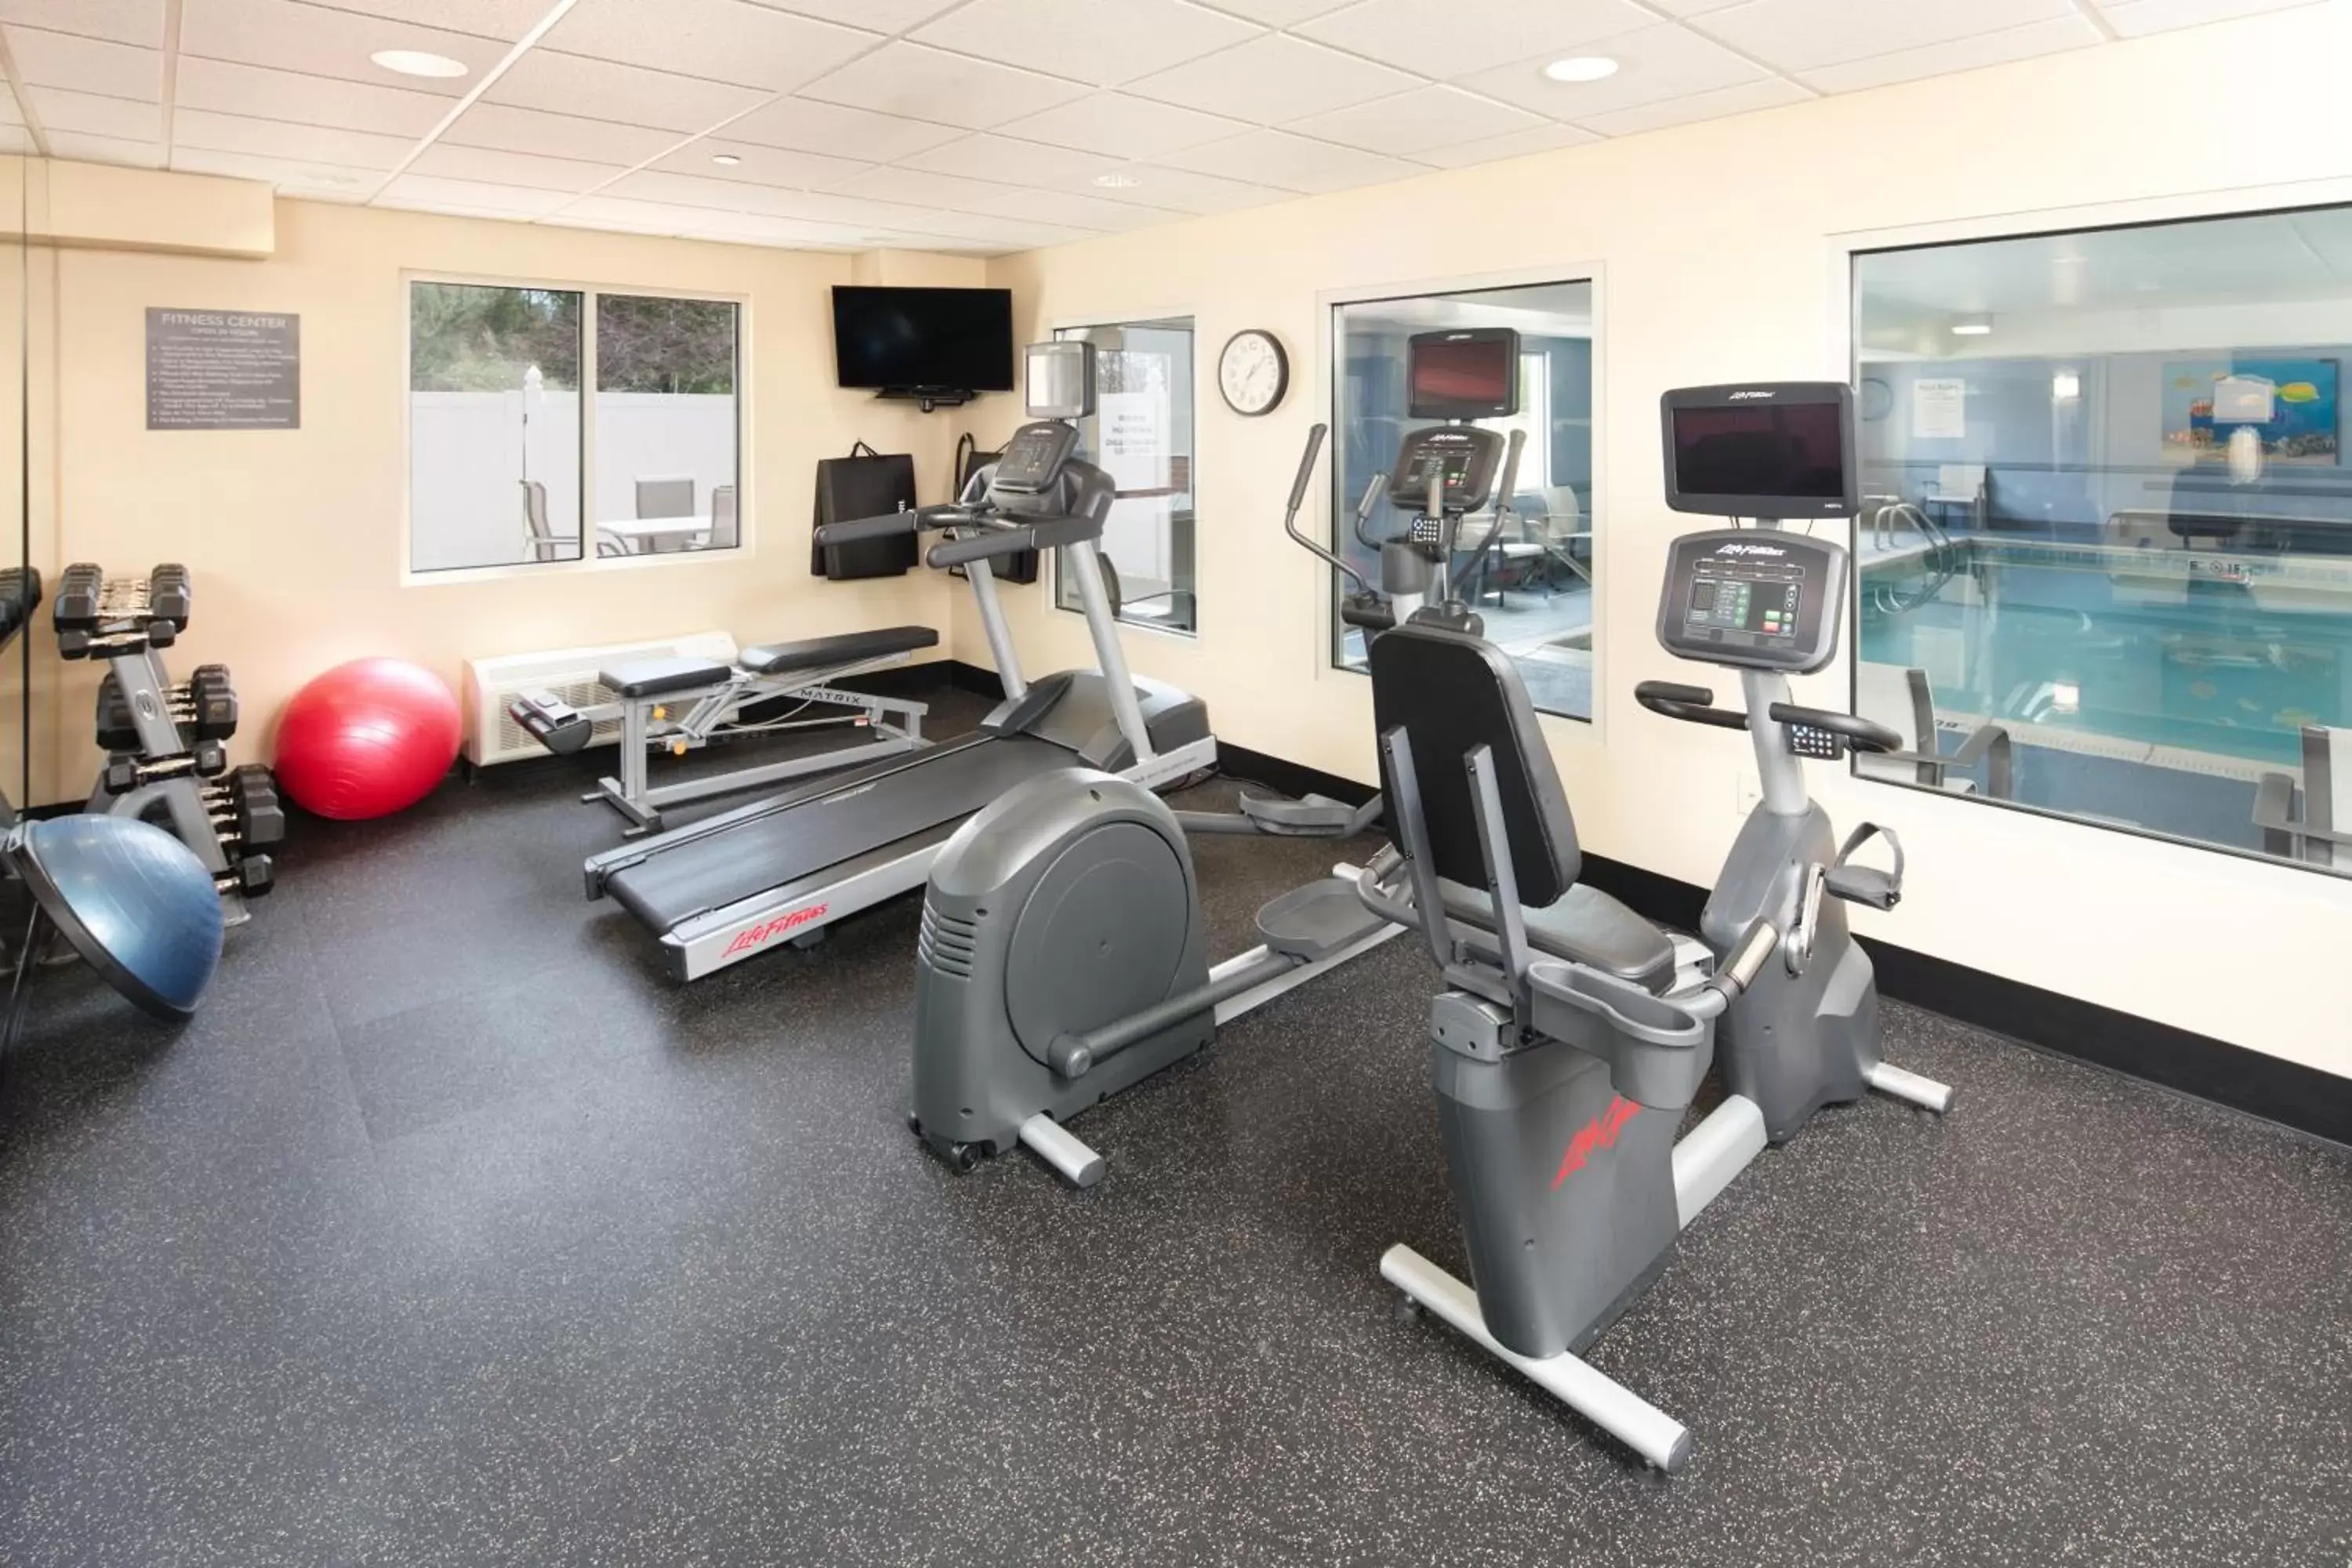 Fitness centre/facilities, Fitness Center/Facilities in Country Inn & Suites by Radisson, Elizabethtown, KY